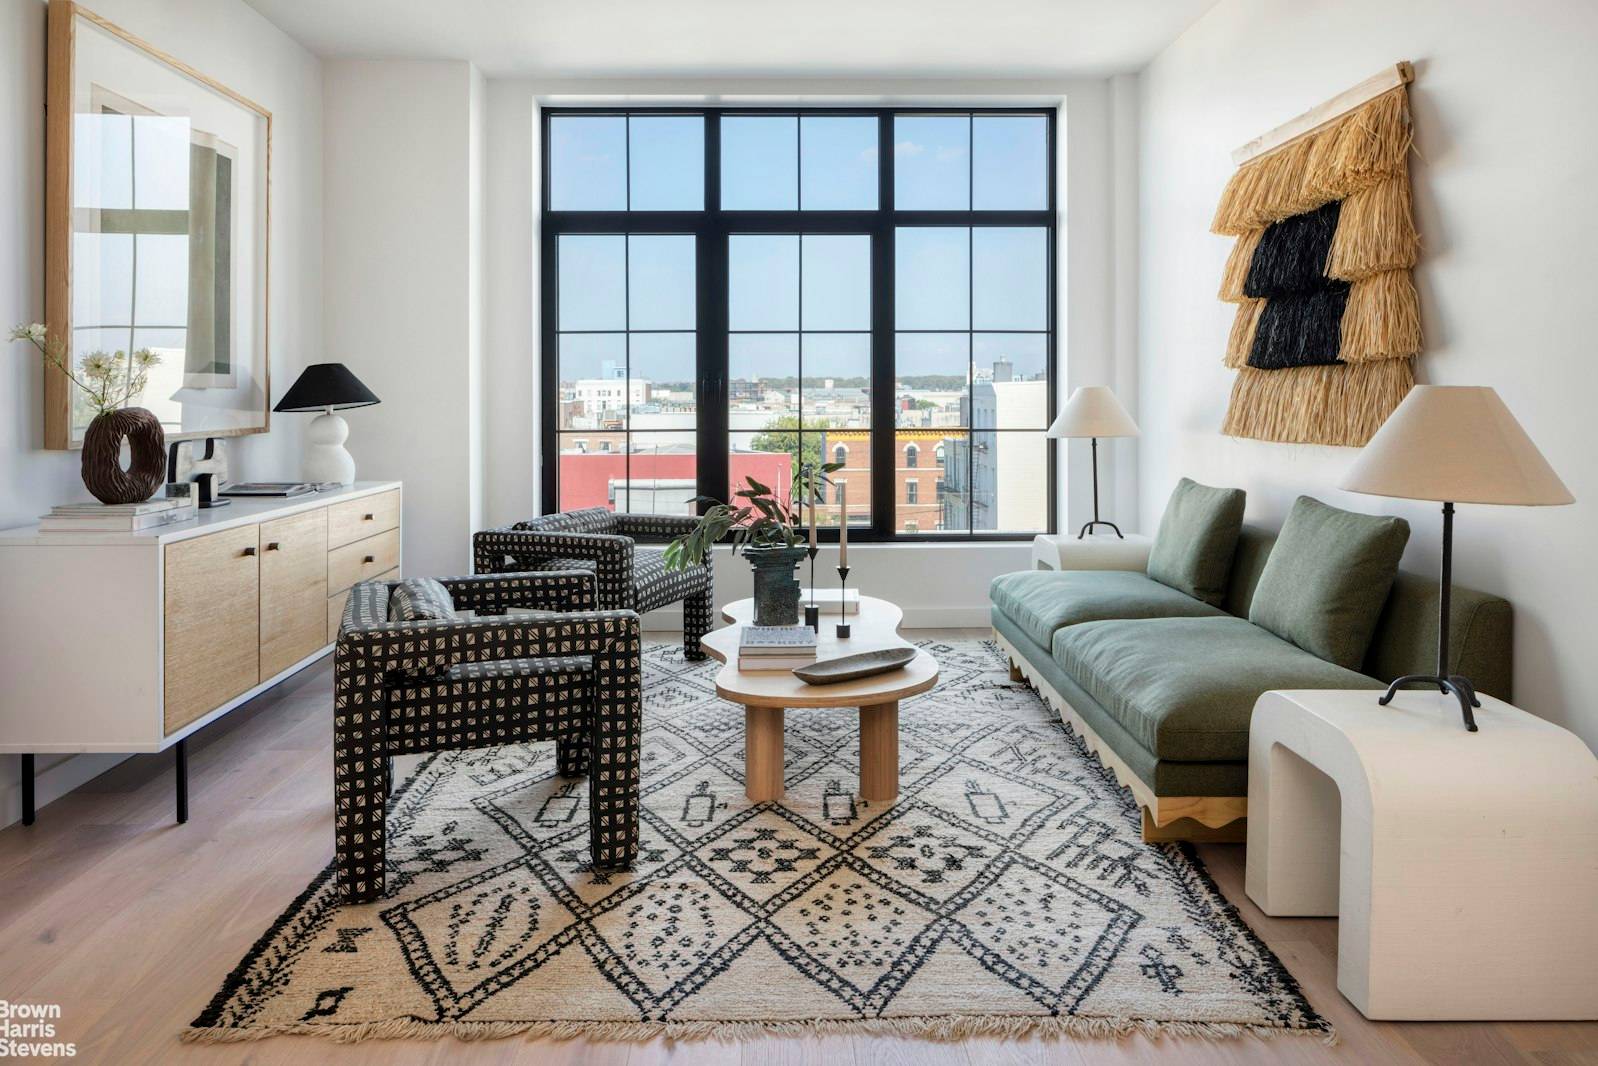 Welcome to The Lumin, a newly constructed boutique scale condominium featuring a traditional red brick fa ade with oversized warehousestyle windows.